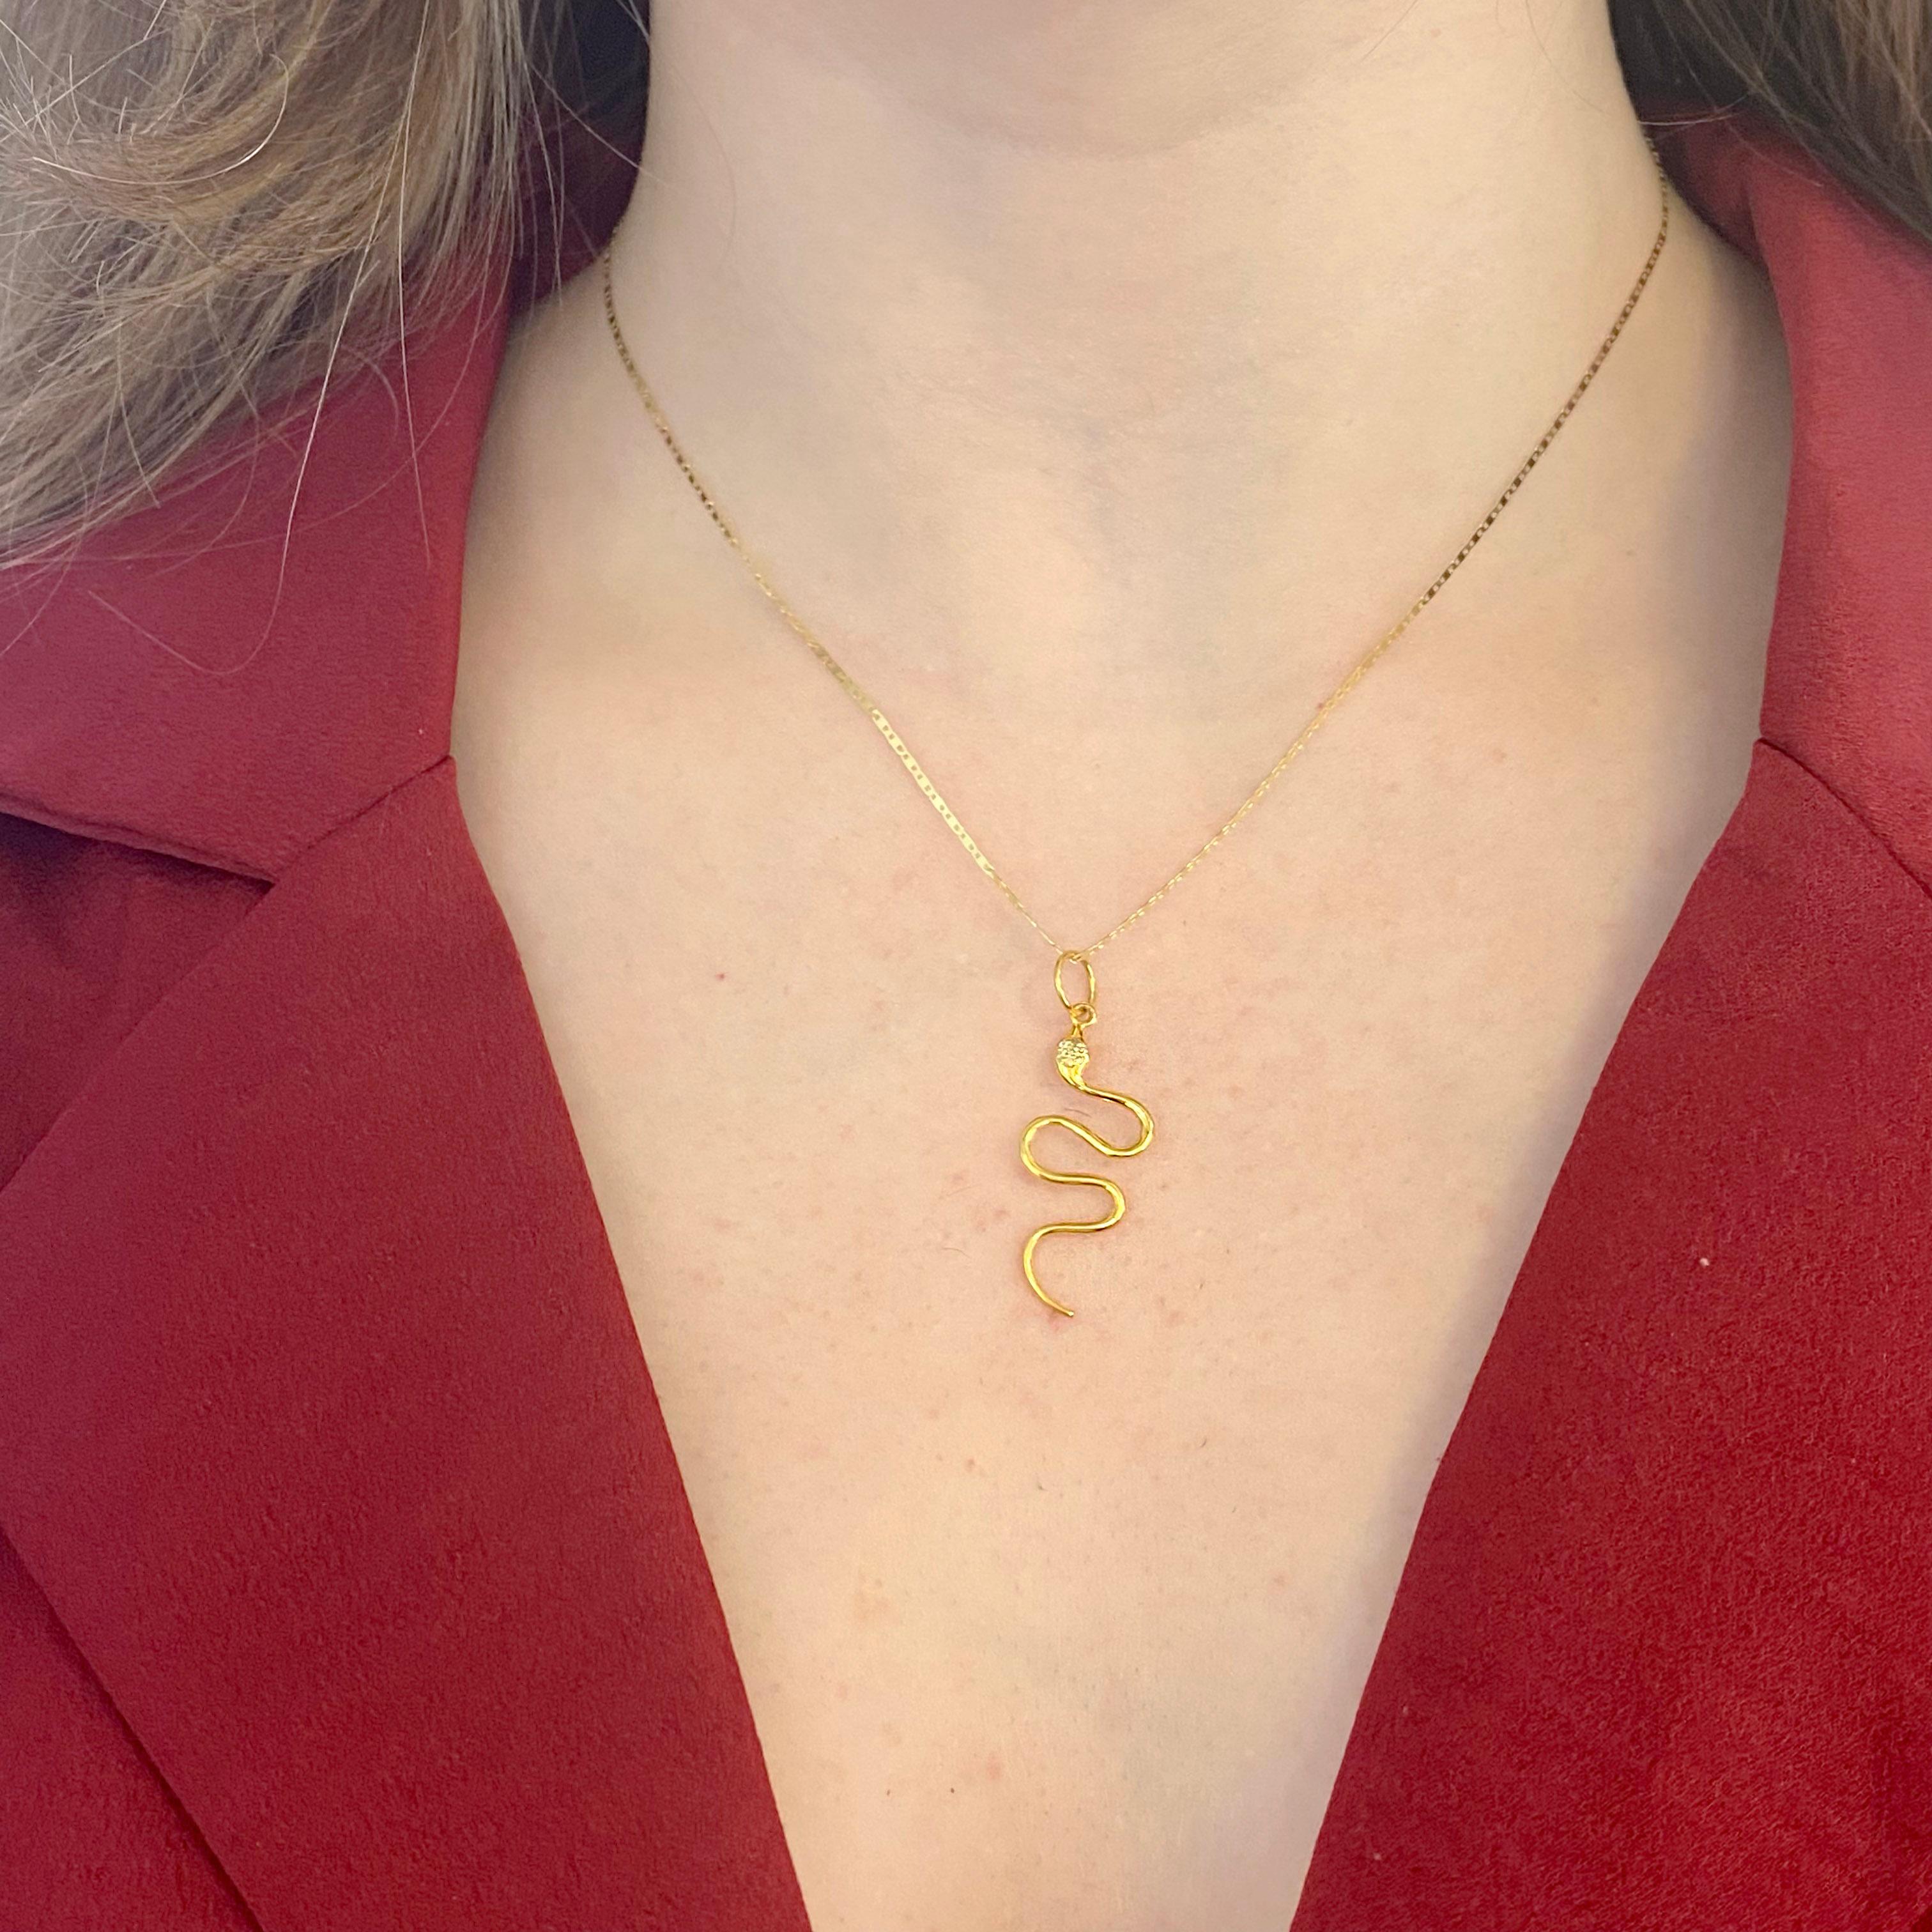 Snakes have long been a popular item for fine jewelry! This snake shows well with its diamond head and solid 14 karat yellow gold. This necklace includes the chain! The details for this beautiful necklace are listed below:
Metal Quality: 14 karat